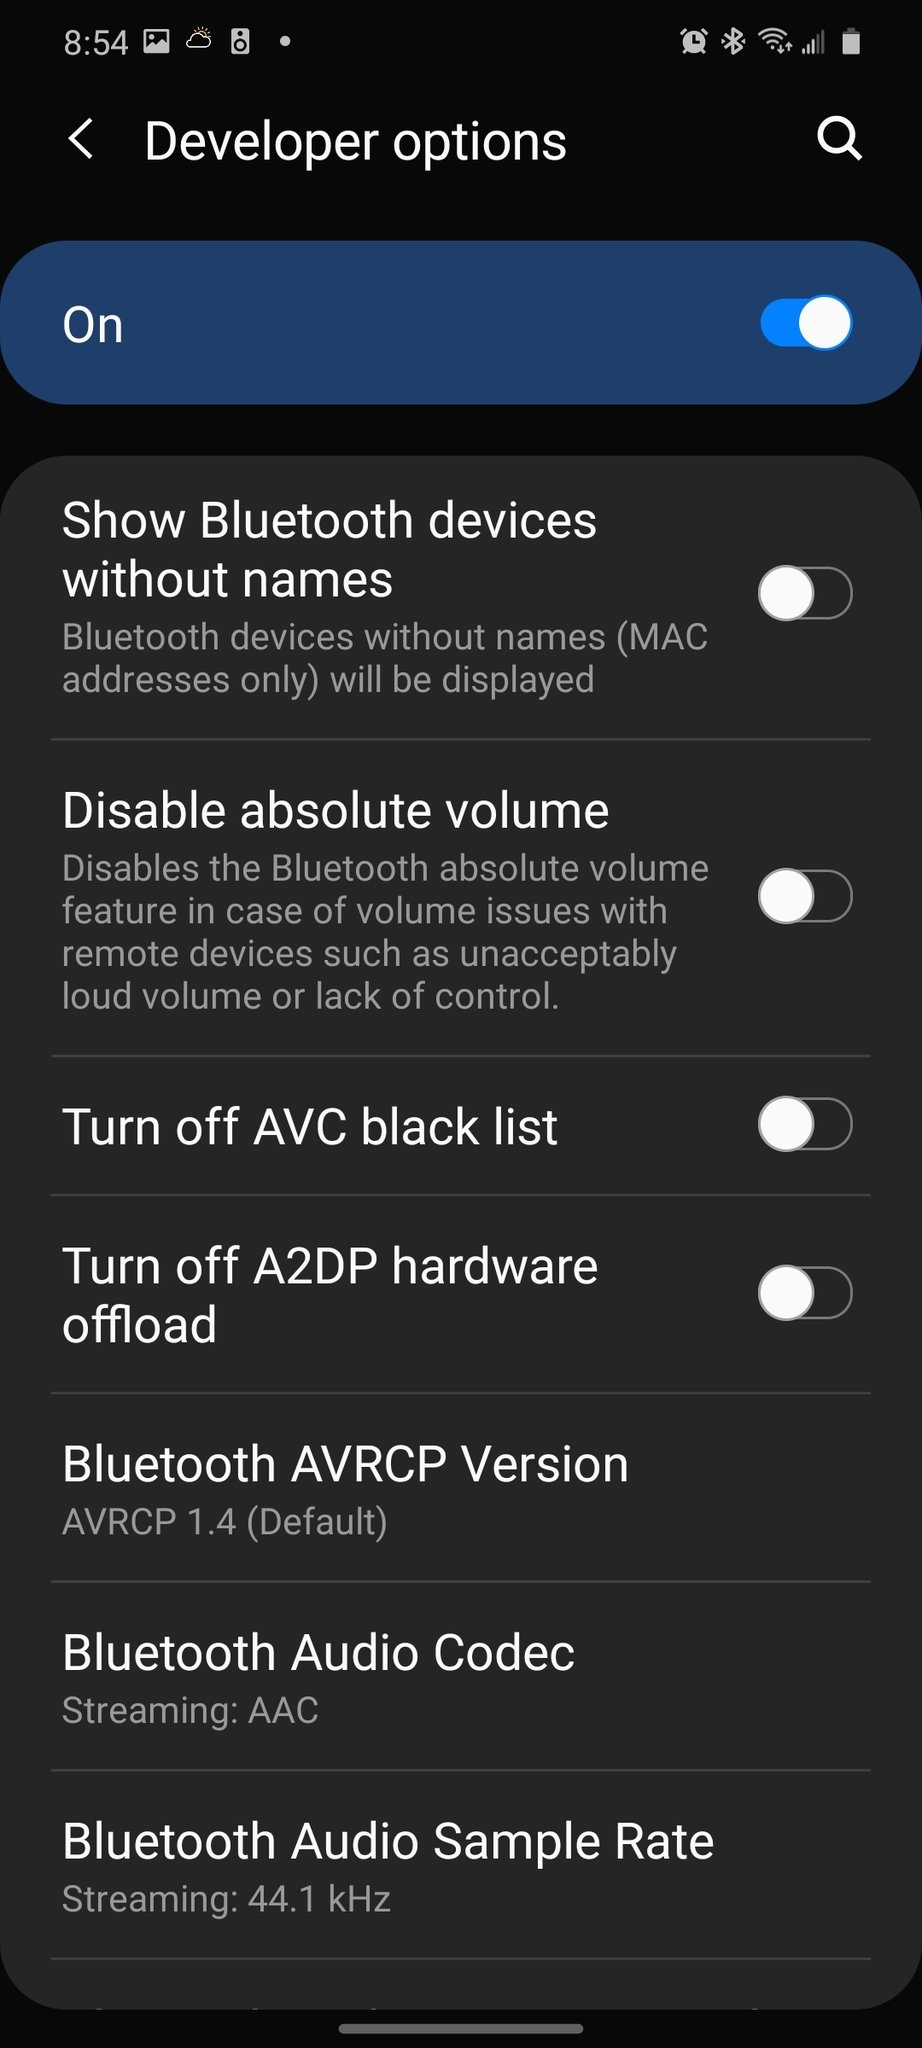 Toggle Disable absolute volume